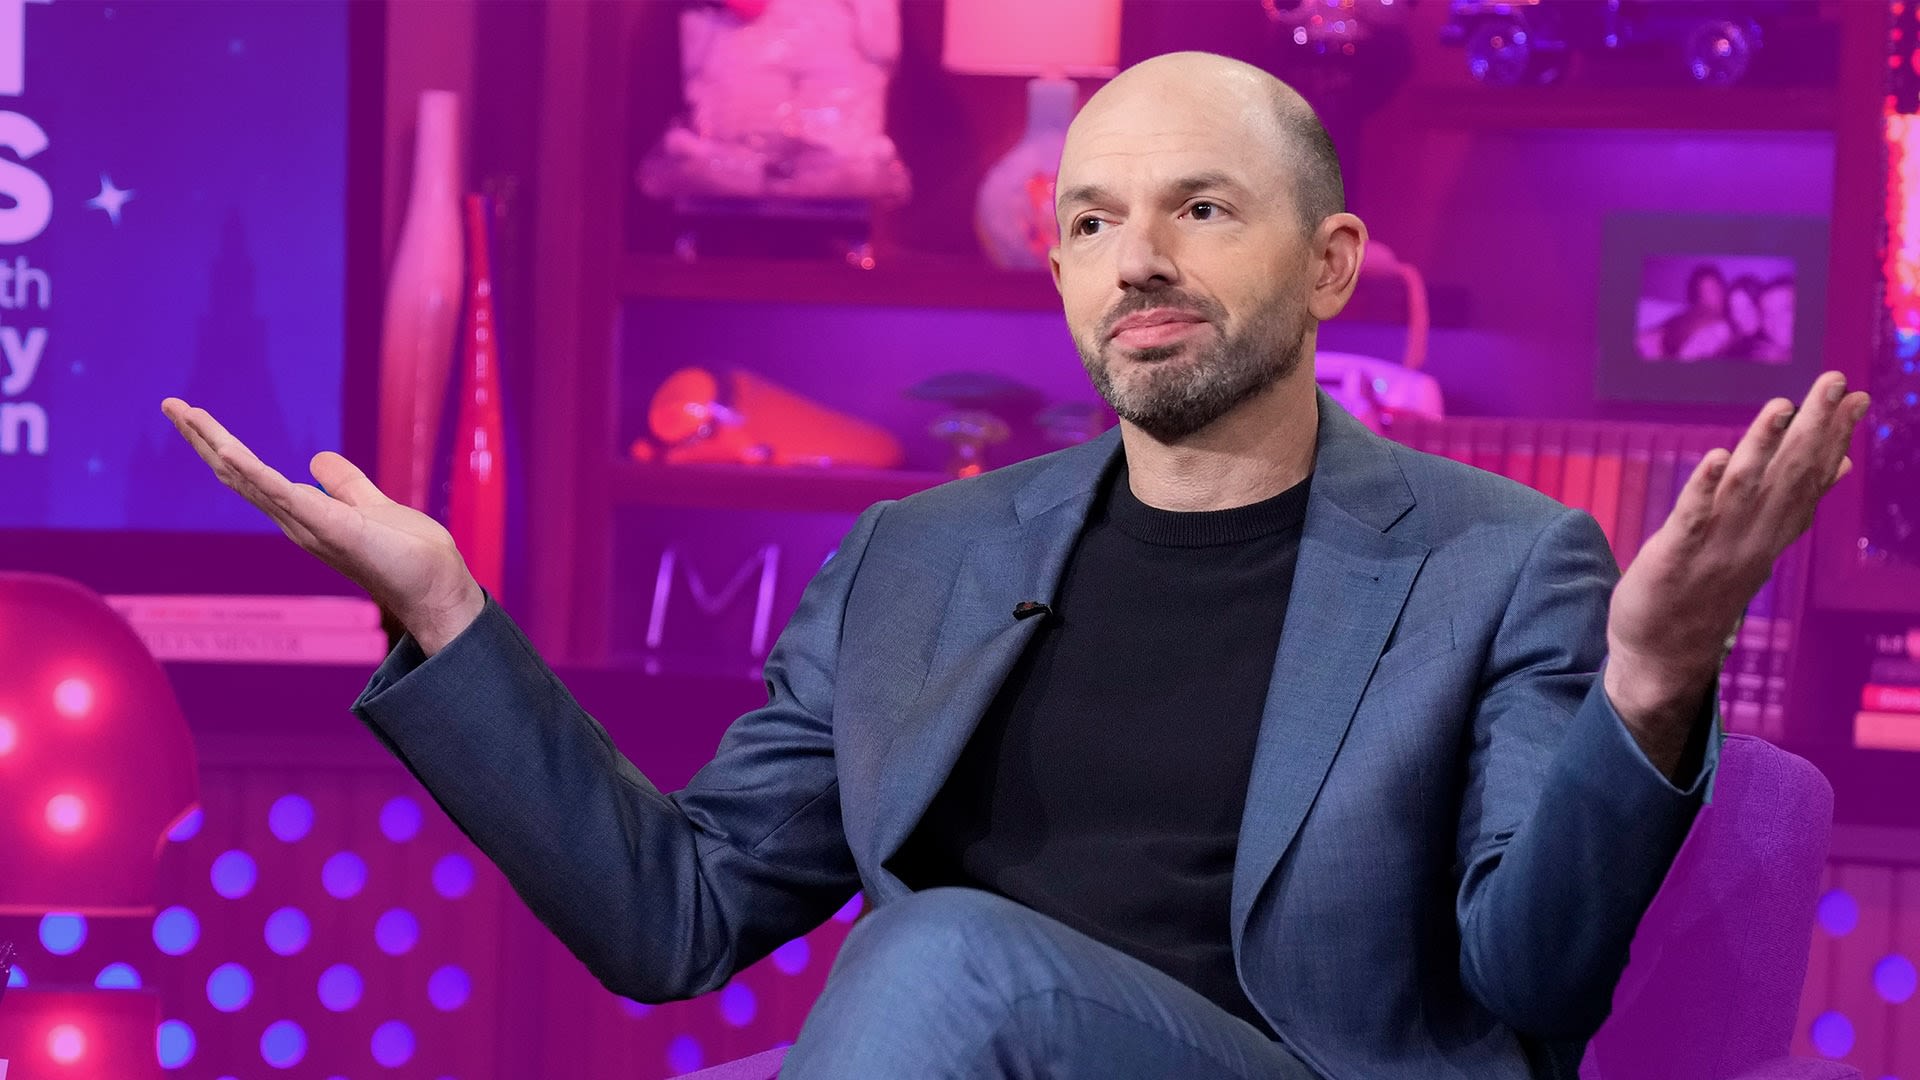 Paul Scheer Says He Was Incredibly Nervous When He Gave Jane Fonda His Book | Bravo TV Official Site